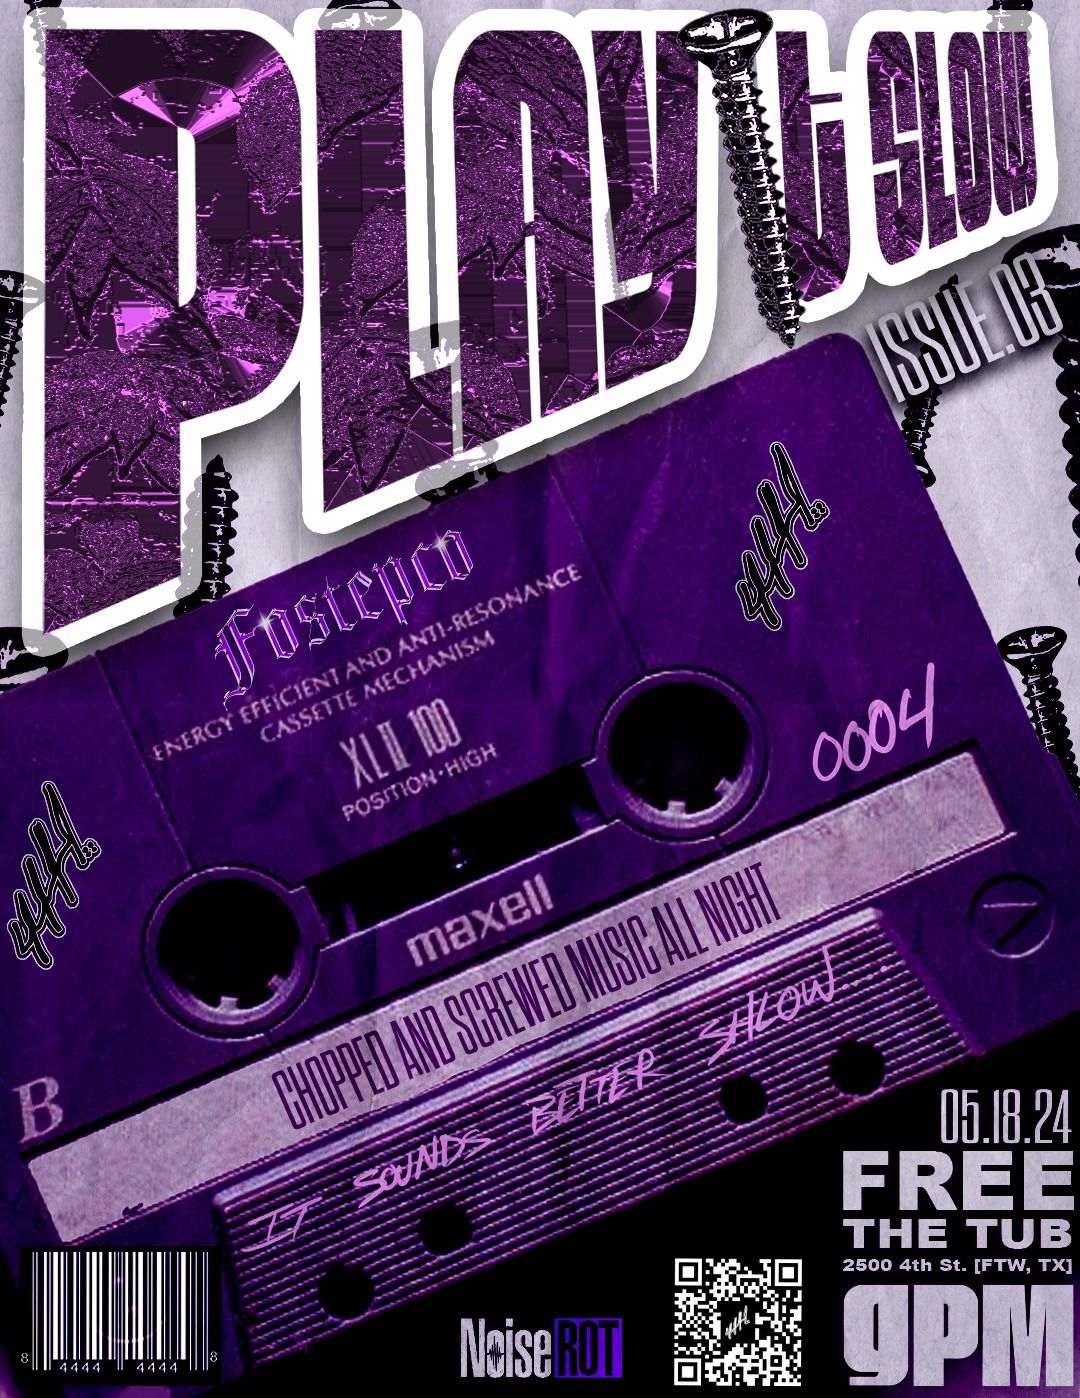 Play It Slow [Issue.02] - A Night 4 Chopped & Screwed Music